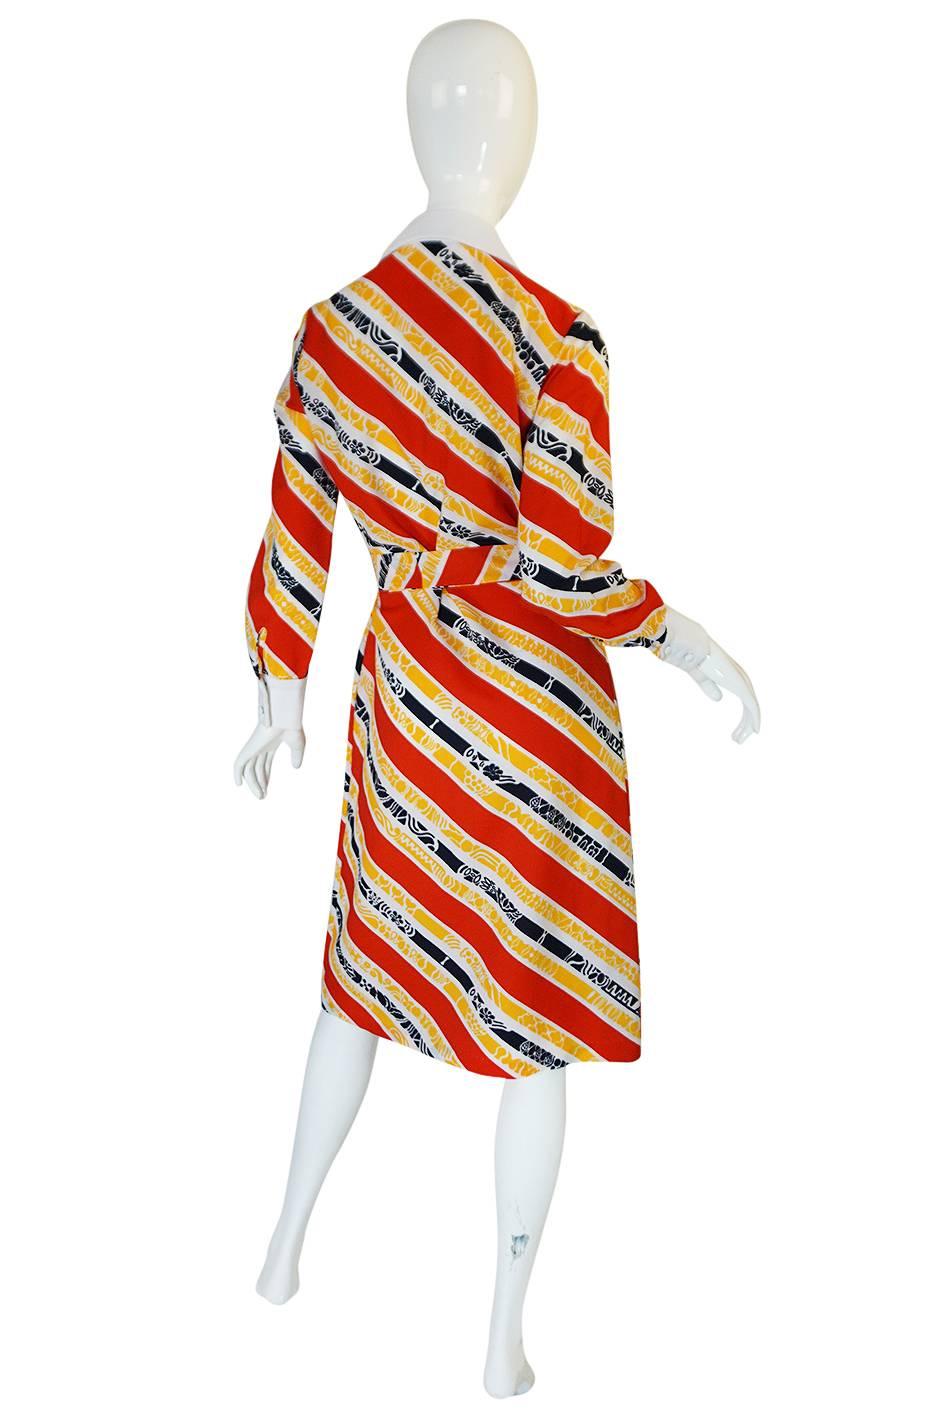 If you need a bold, statement making, sort of crazy dress - you just found it. This is one of those fabulous 1970s shirt dress pieces that Lanvin excelled at in the early part of the decade. This one is especially bright and happy feeling. It is